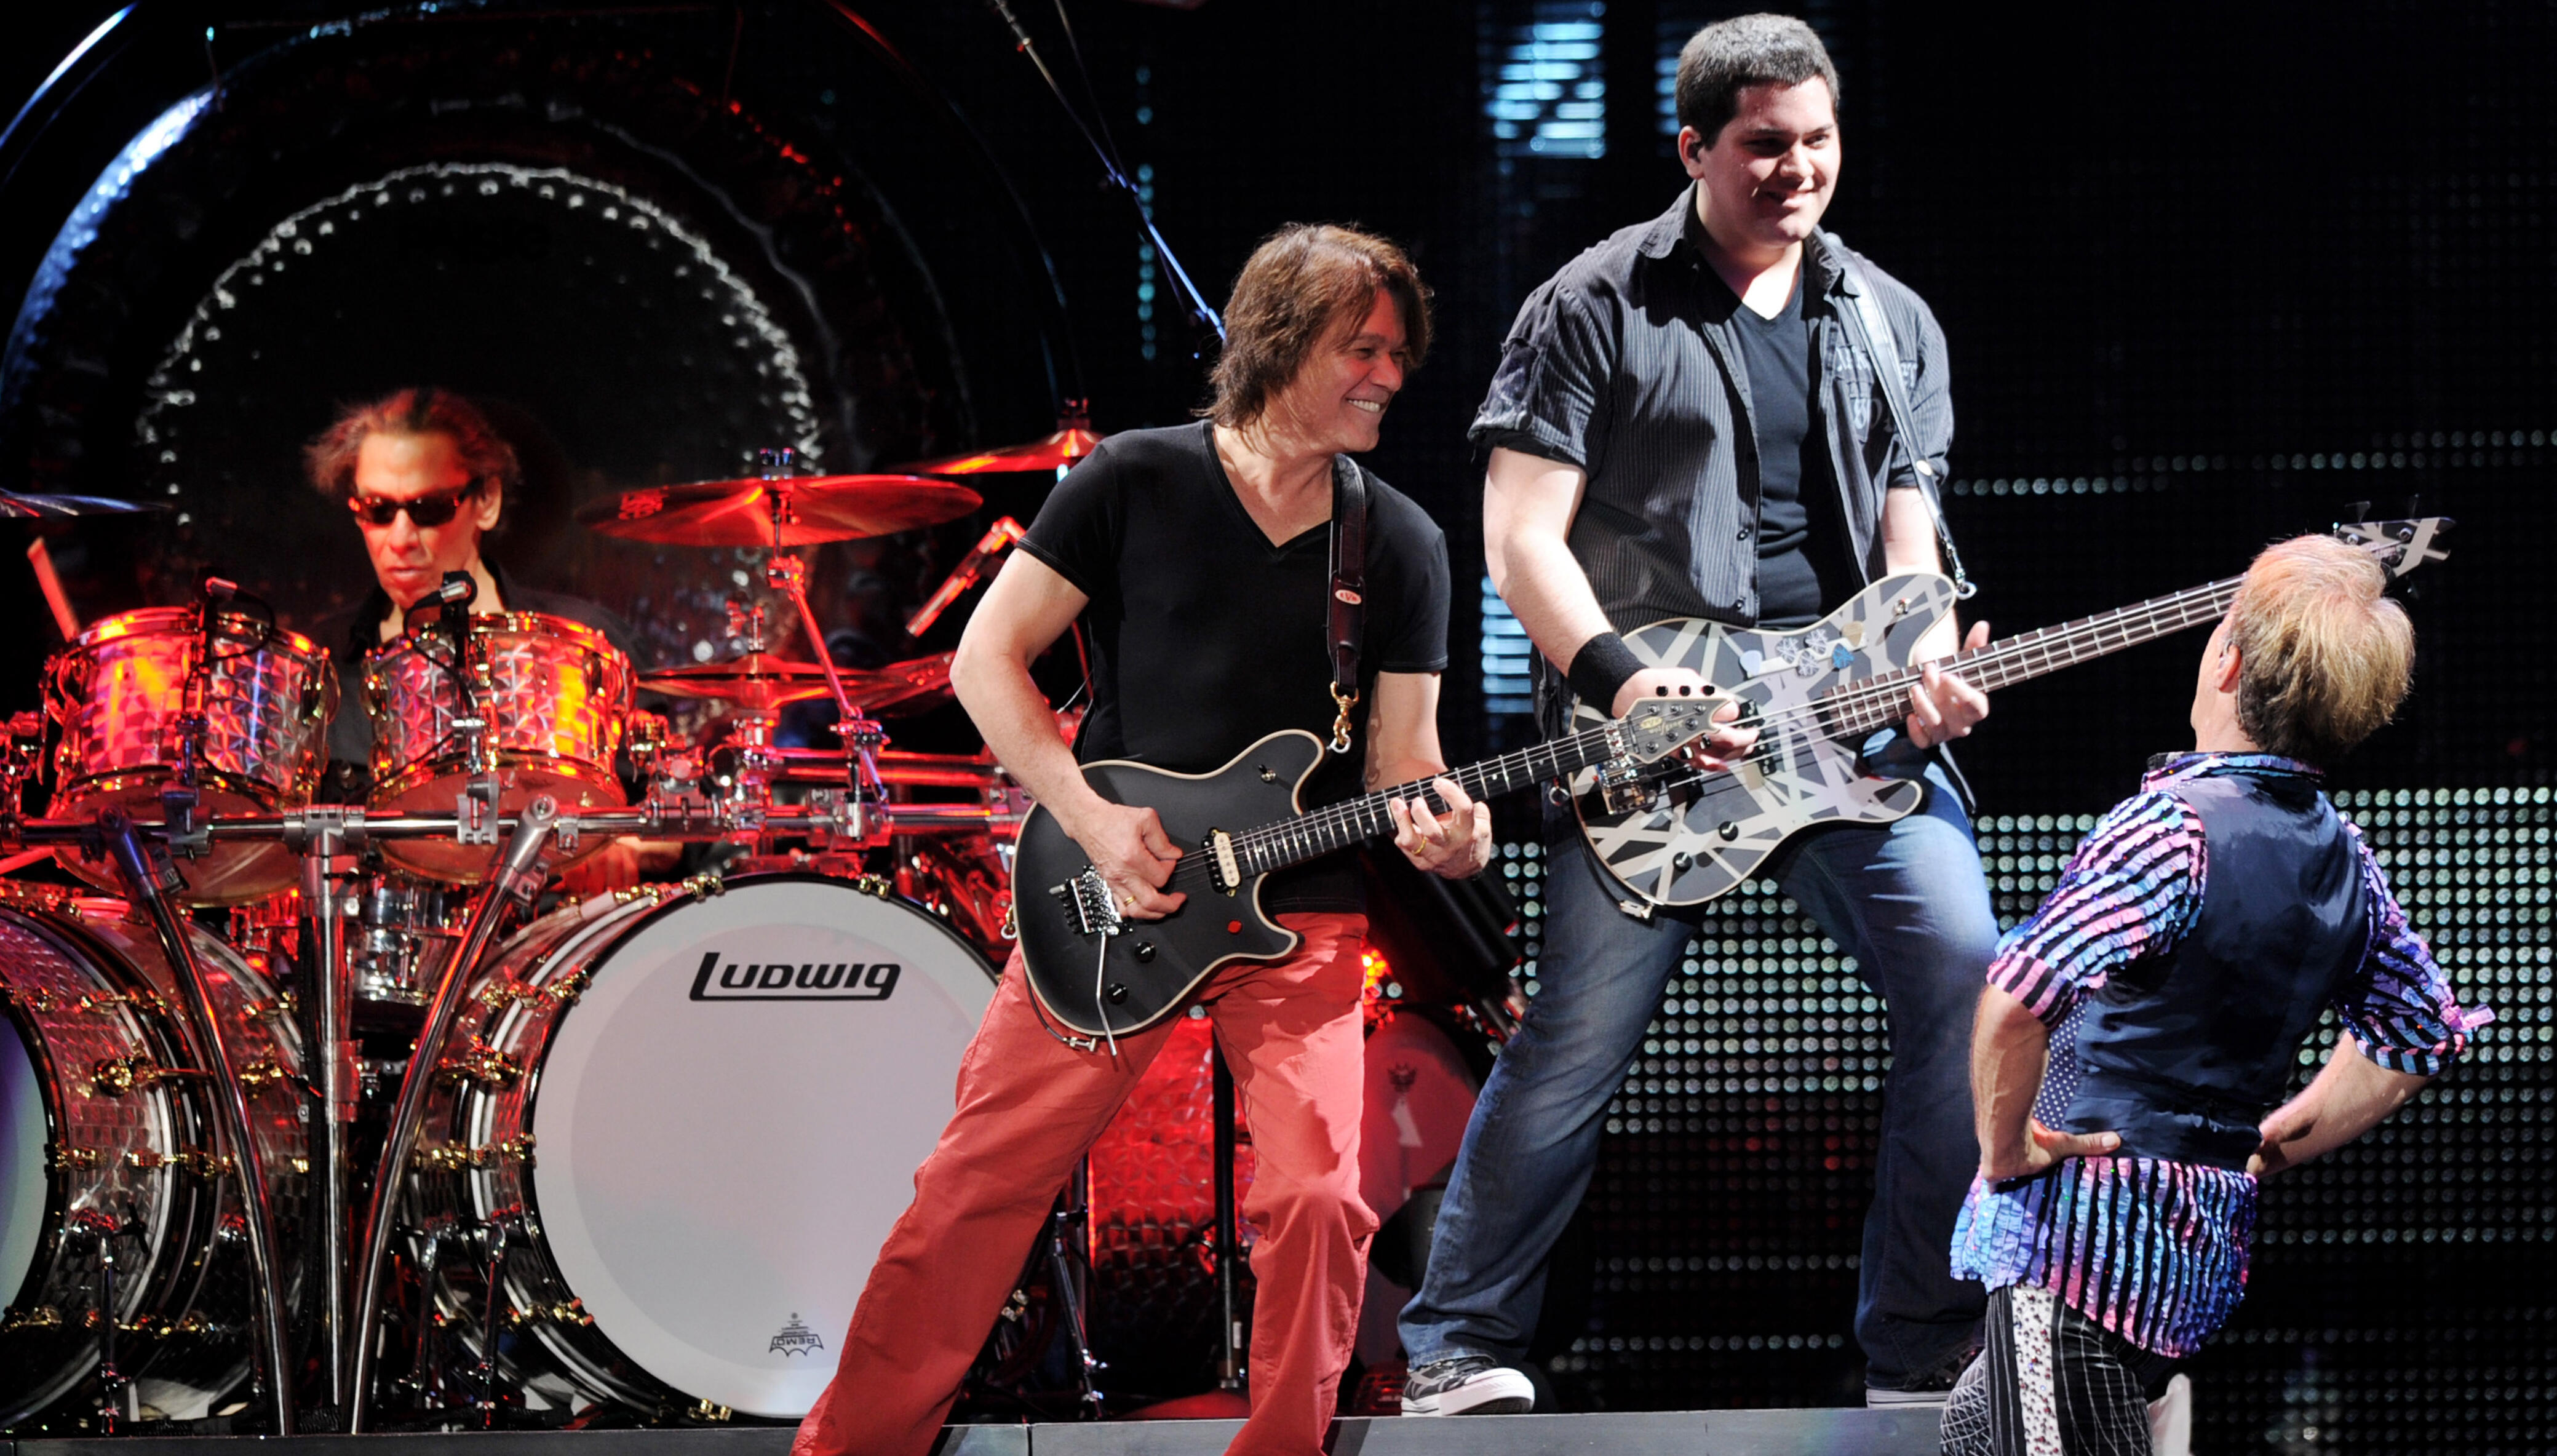 Van Halen Tribute On Hold Due To 'Very Difficult' People, Wolfgang Says ...